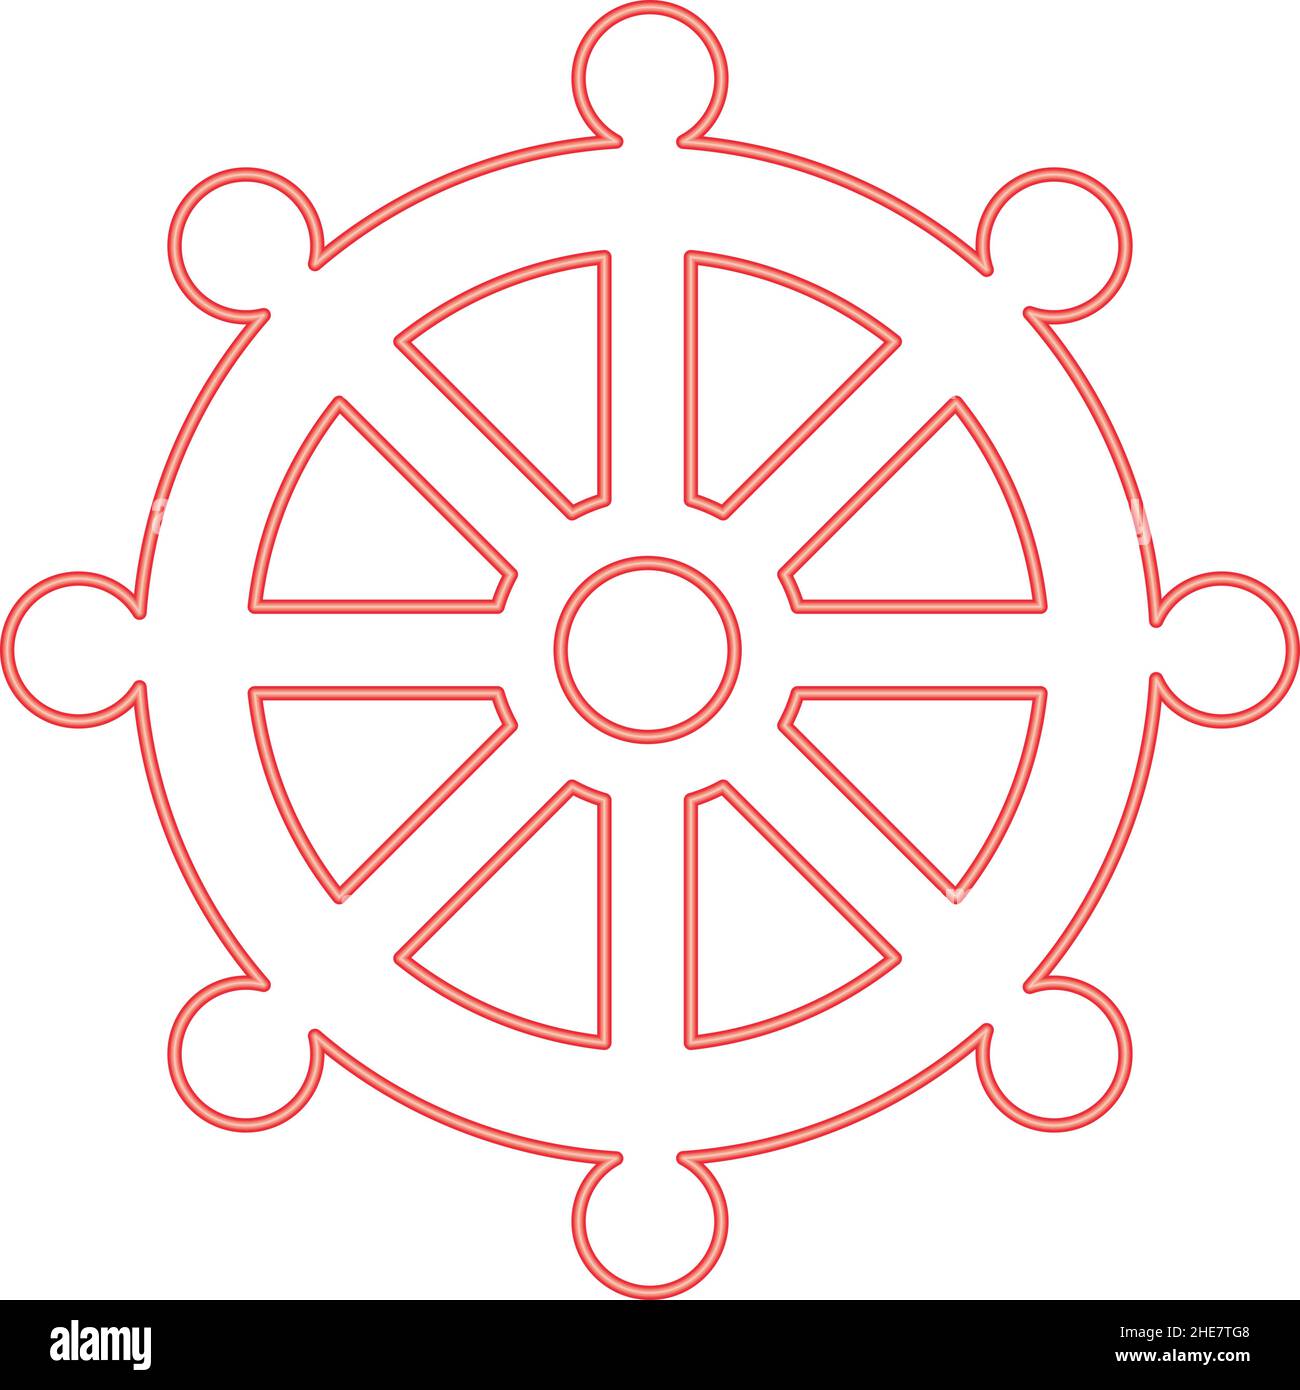 Neon symbol budhism wheel law religious sign red color vector illustration image flat style light Stock Vector